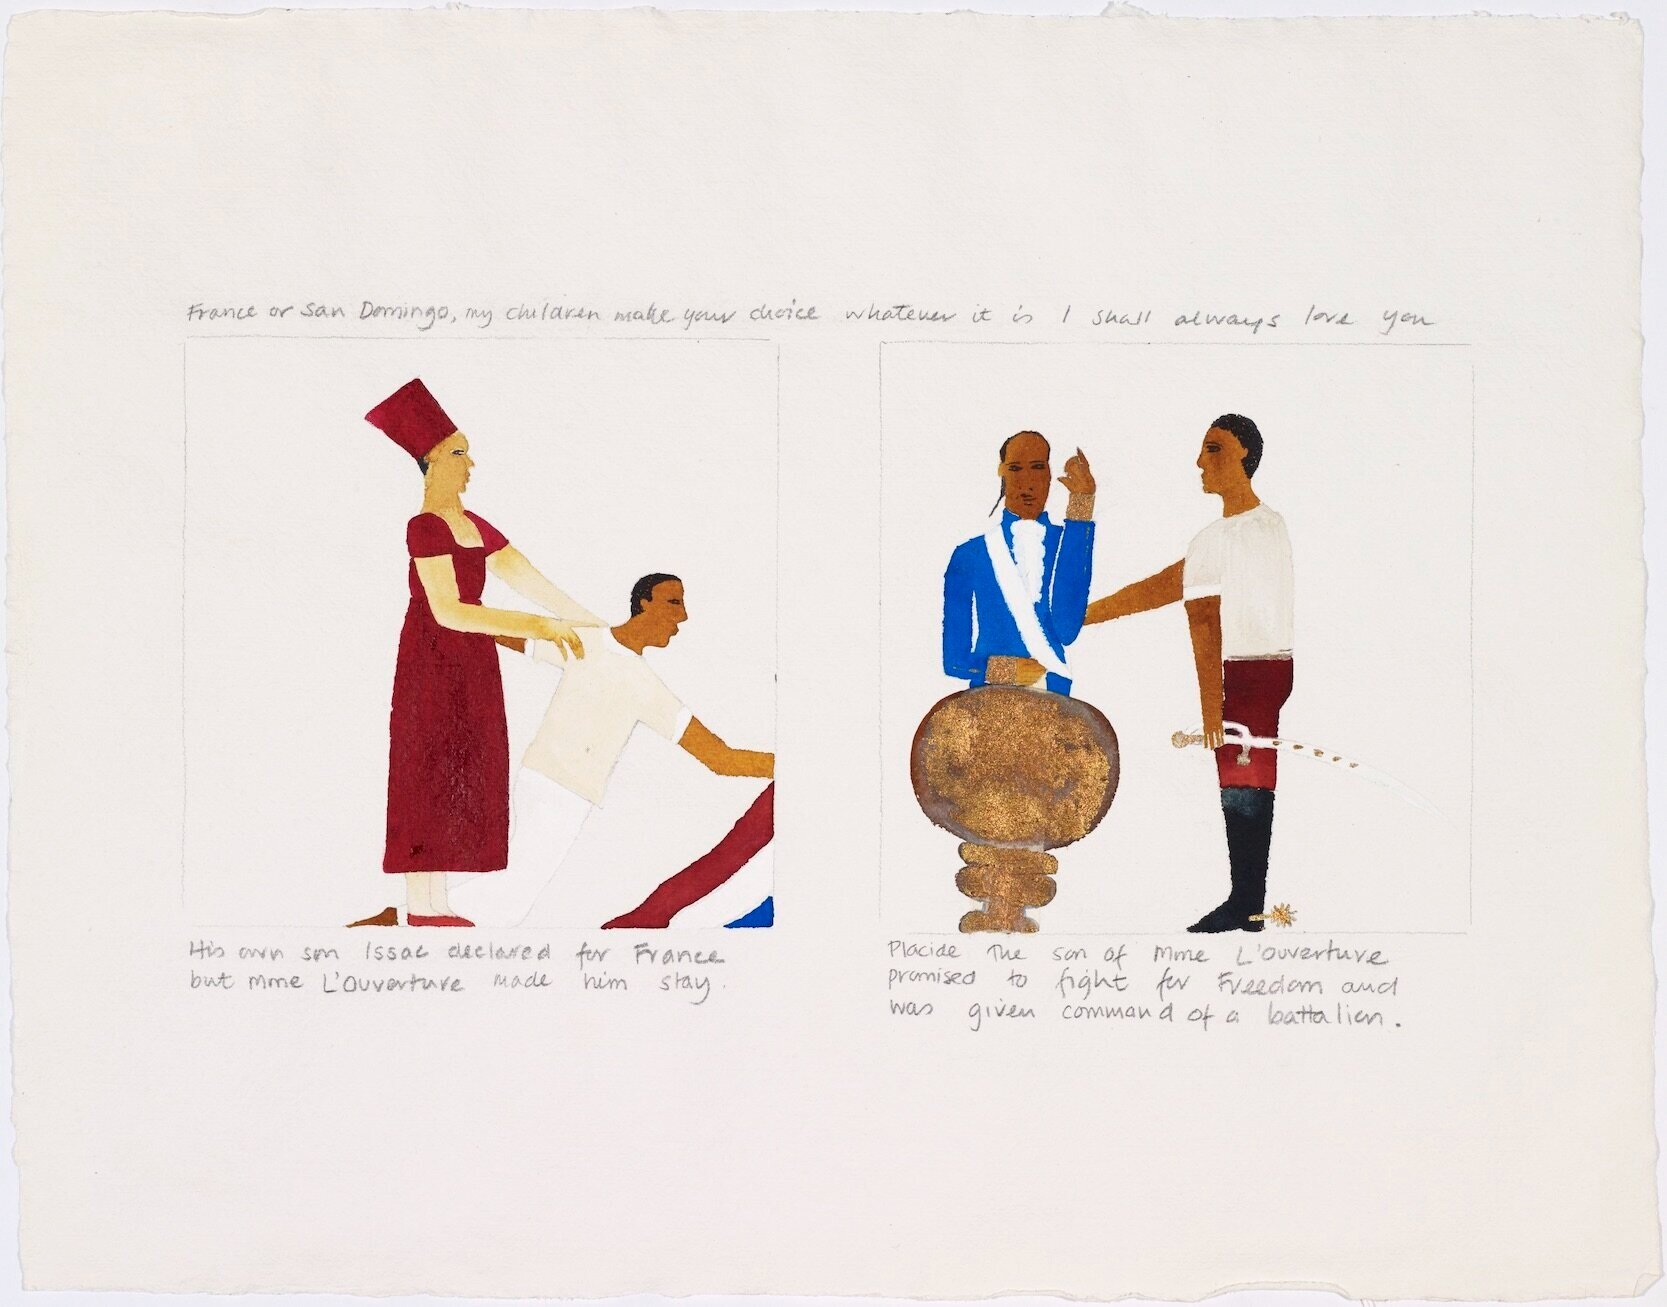 Lubaina Himid, Scenes from the Life of Toussaint L'Ouverture: 15 (1987), watercolour and pencil on paper, 39.5 x 50 cm. Arts Council Collection, Southbank Centre, London © Lubaina Himid.